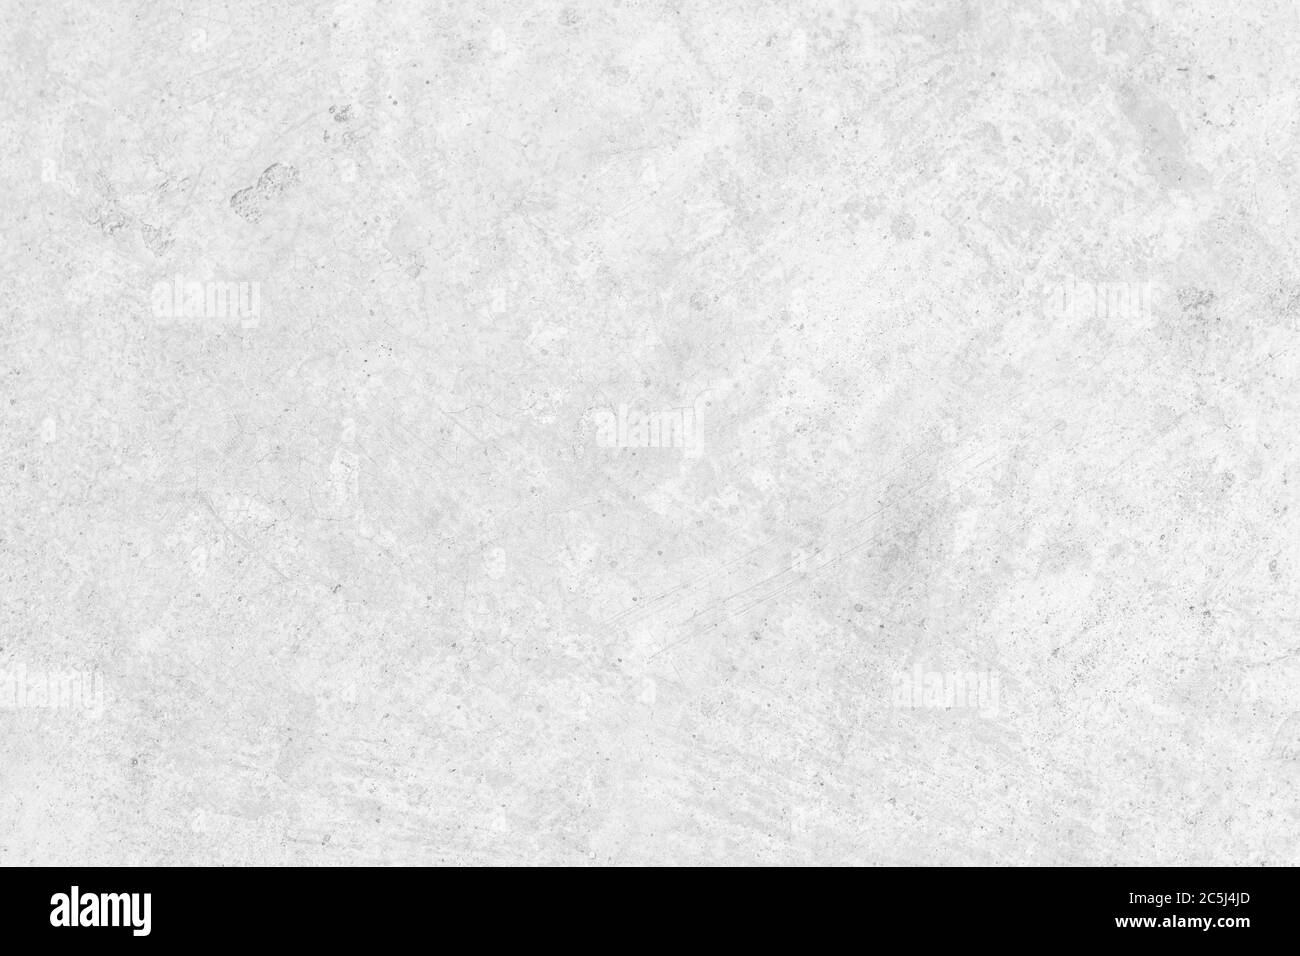 Grunge blank white concrete wall. Design for texture background Stock ...